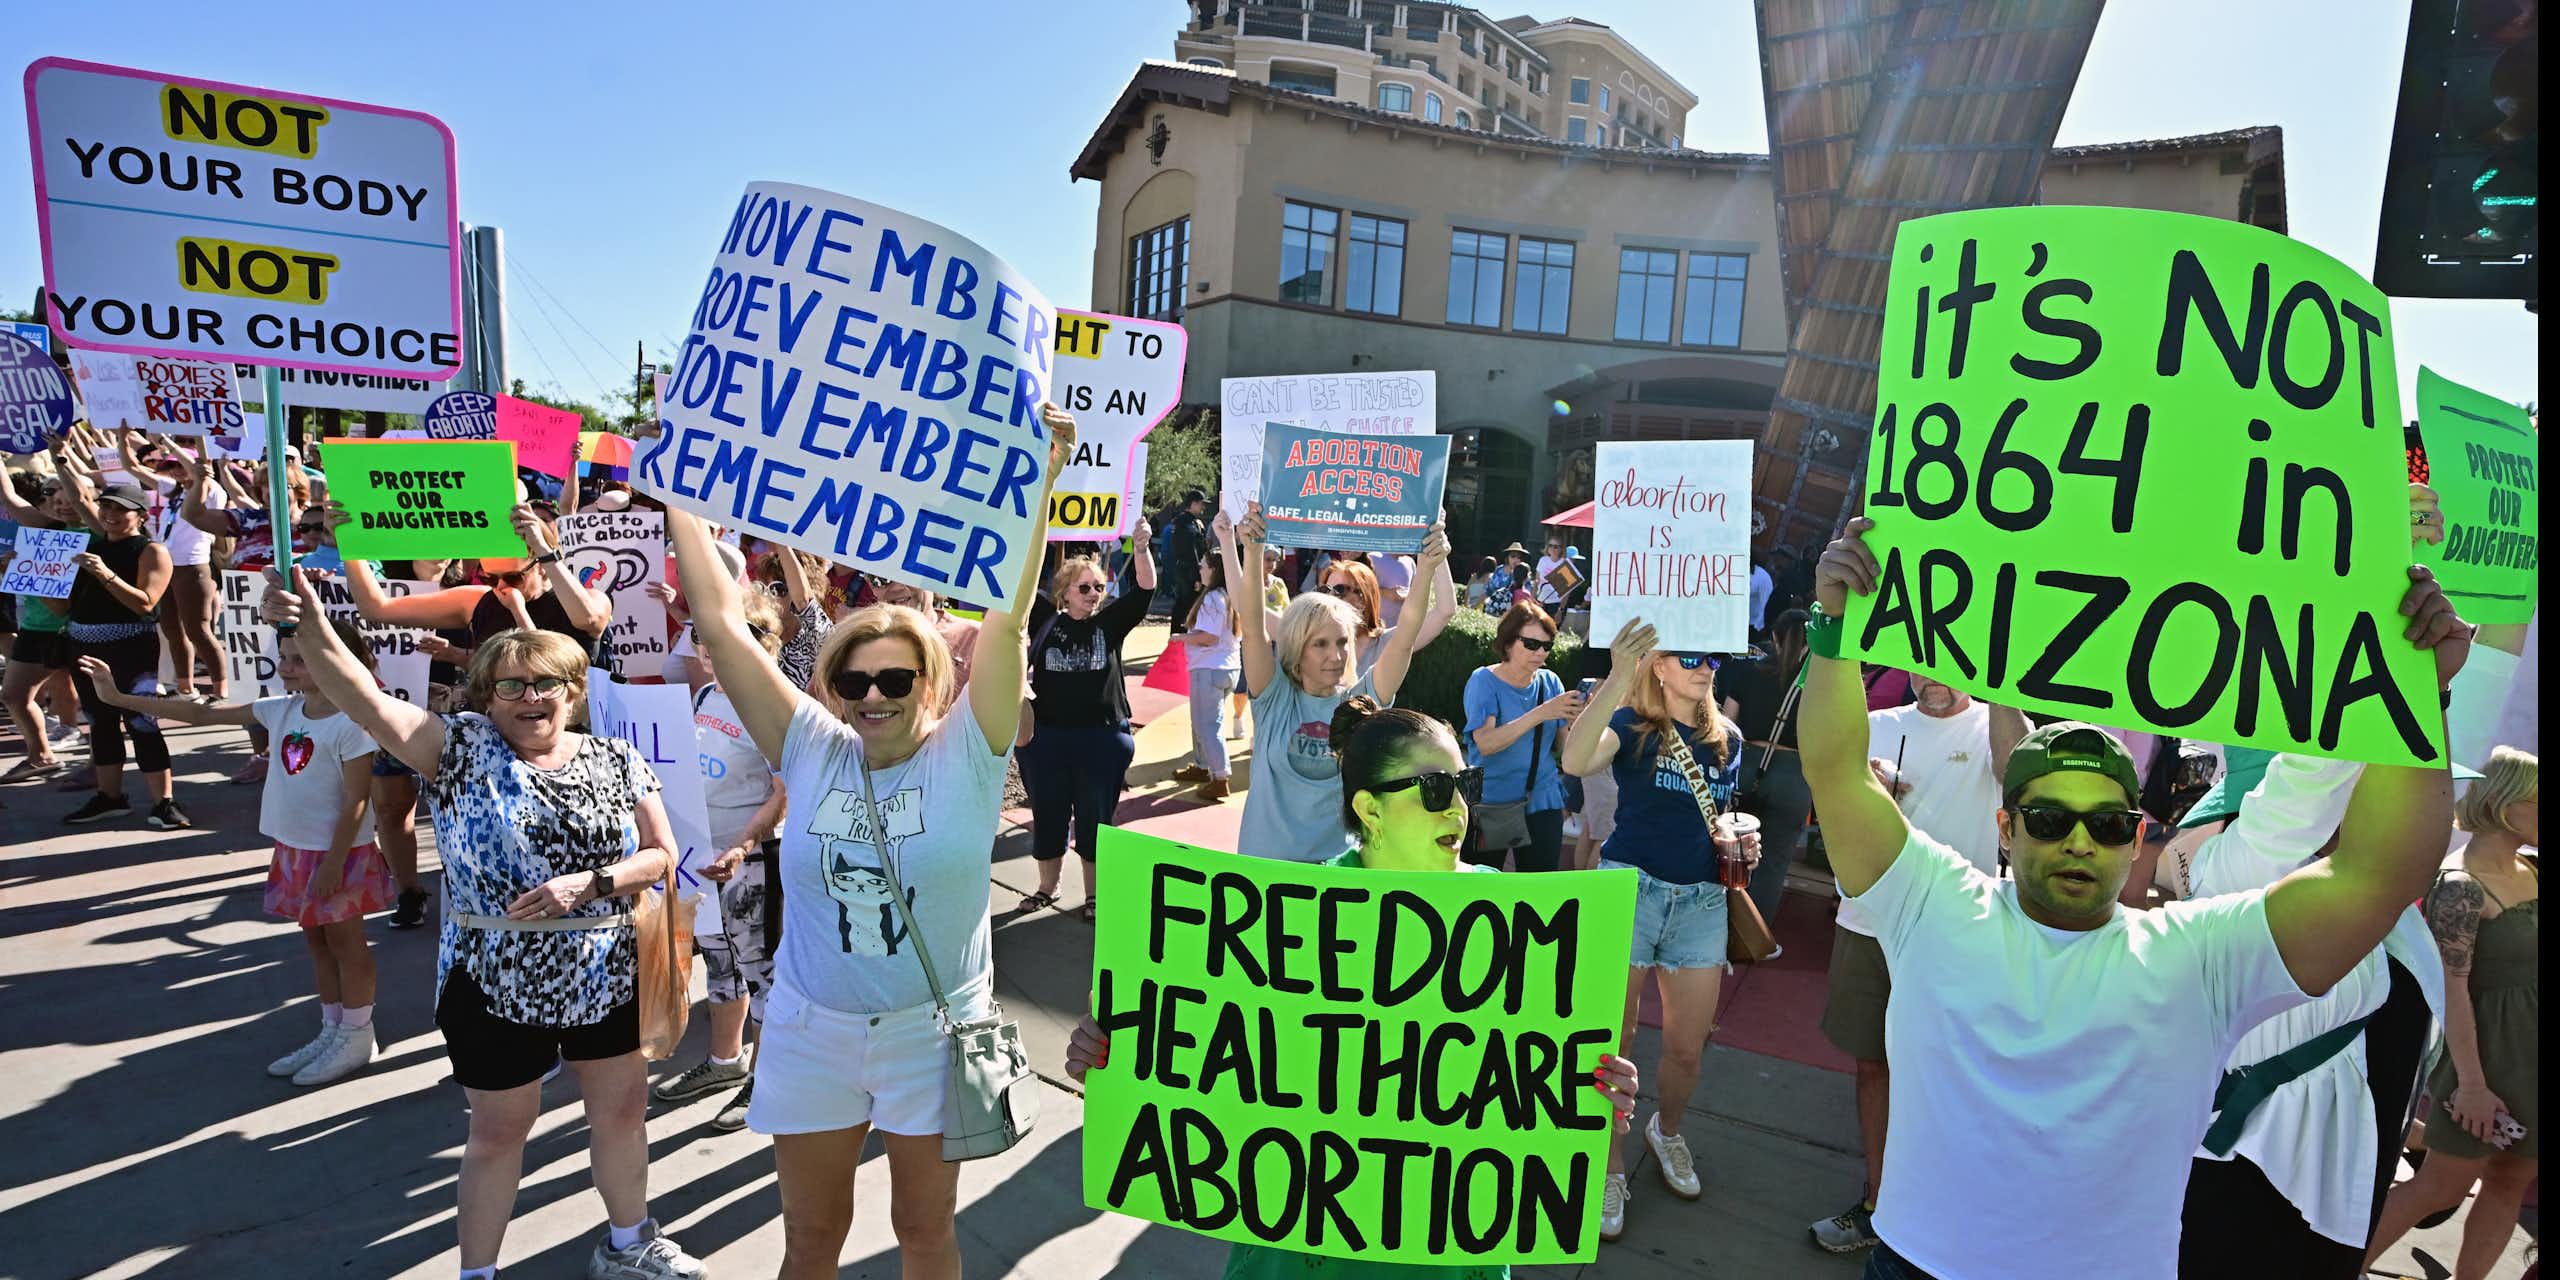 People stand in the streets and hold signs that say, 'It's not 1864 in Arizona,' 'Freedom healthcare abortion,' and 'November November November November.'